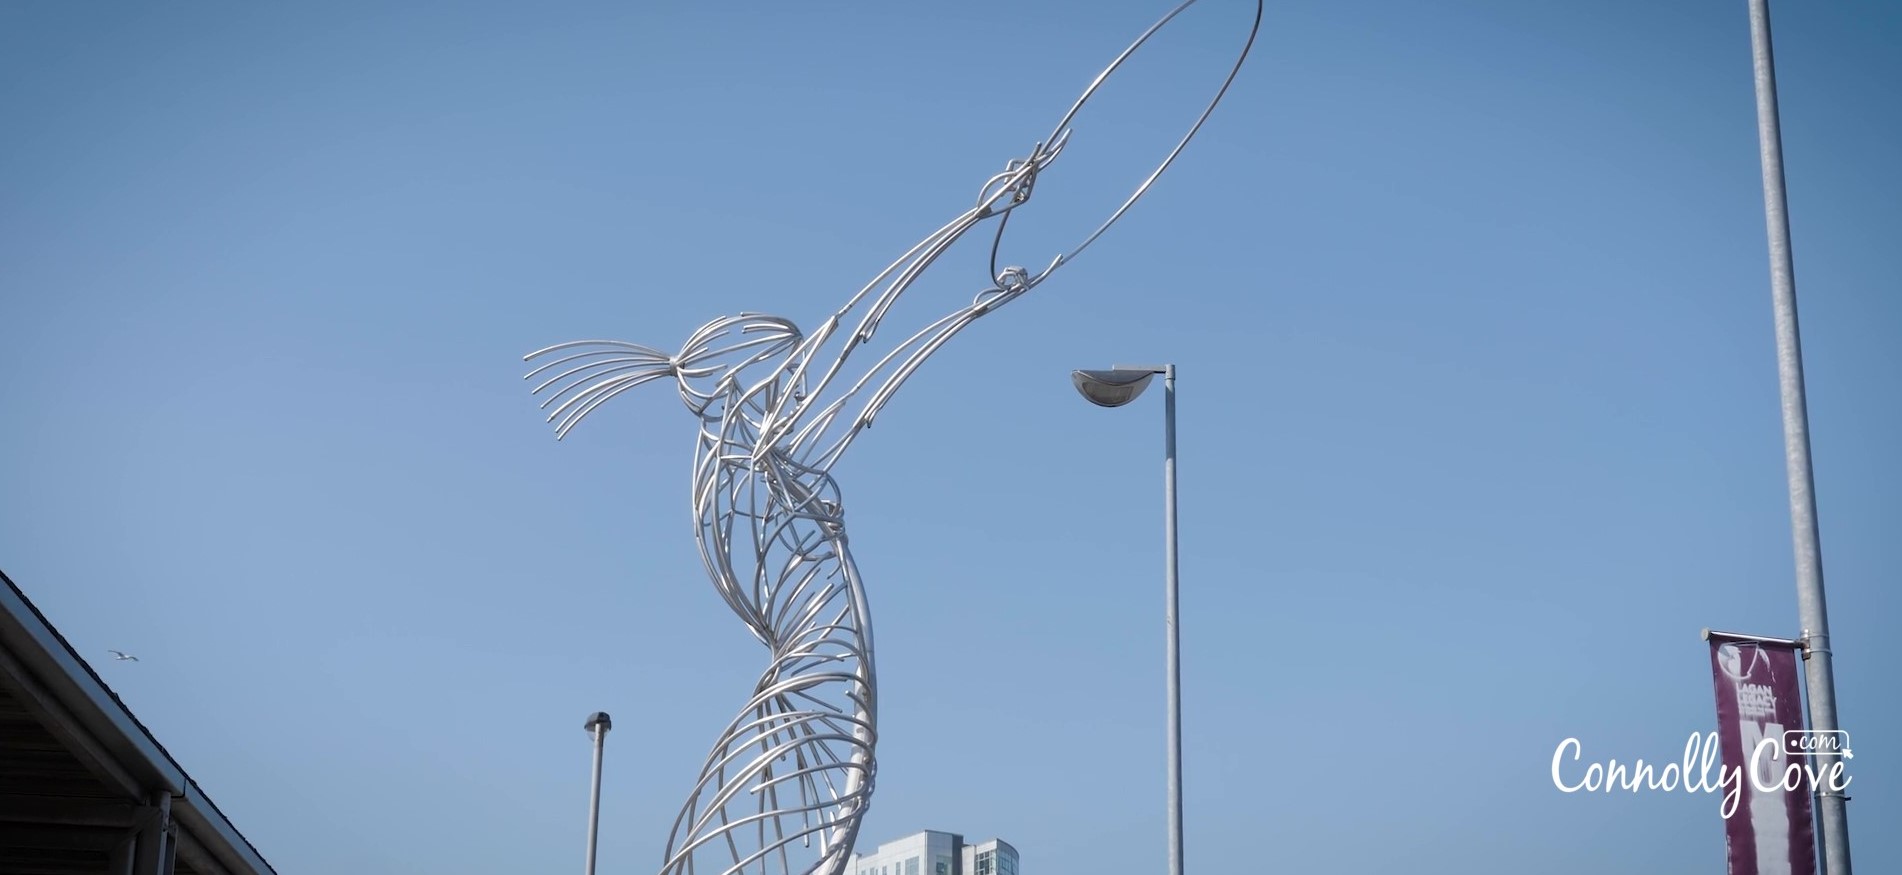 beacon of hope Check out our ultimate guide to things to do in Belfast, we have made note of all the best attractions that you need to visit while on your visit to Belfast, Northern Ireland. So much to see and you won't be bored in Belfast we can promise that!